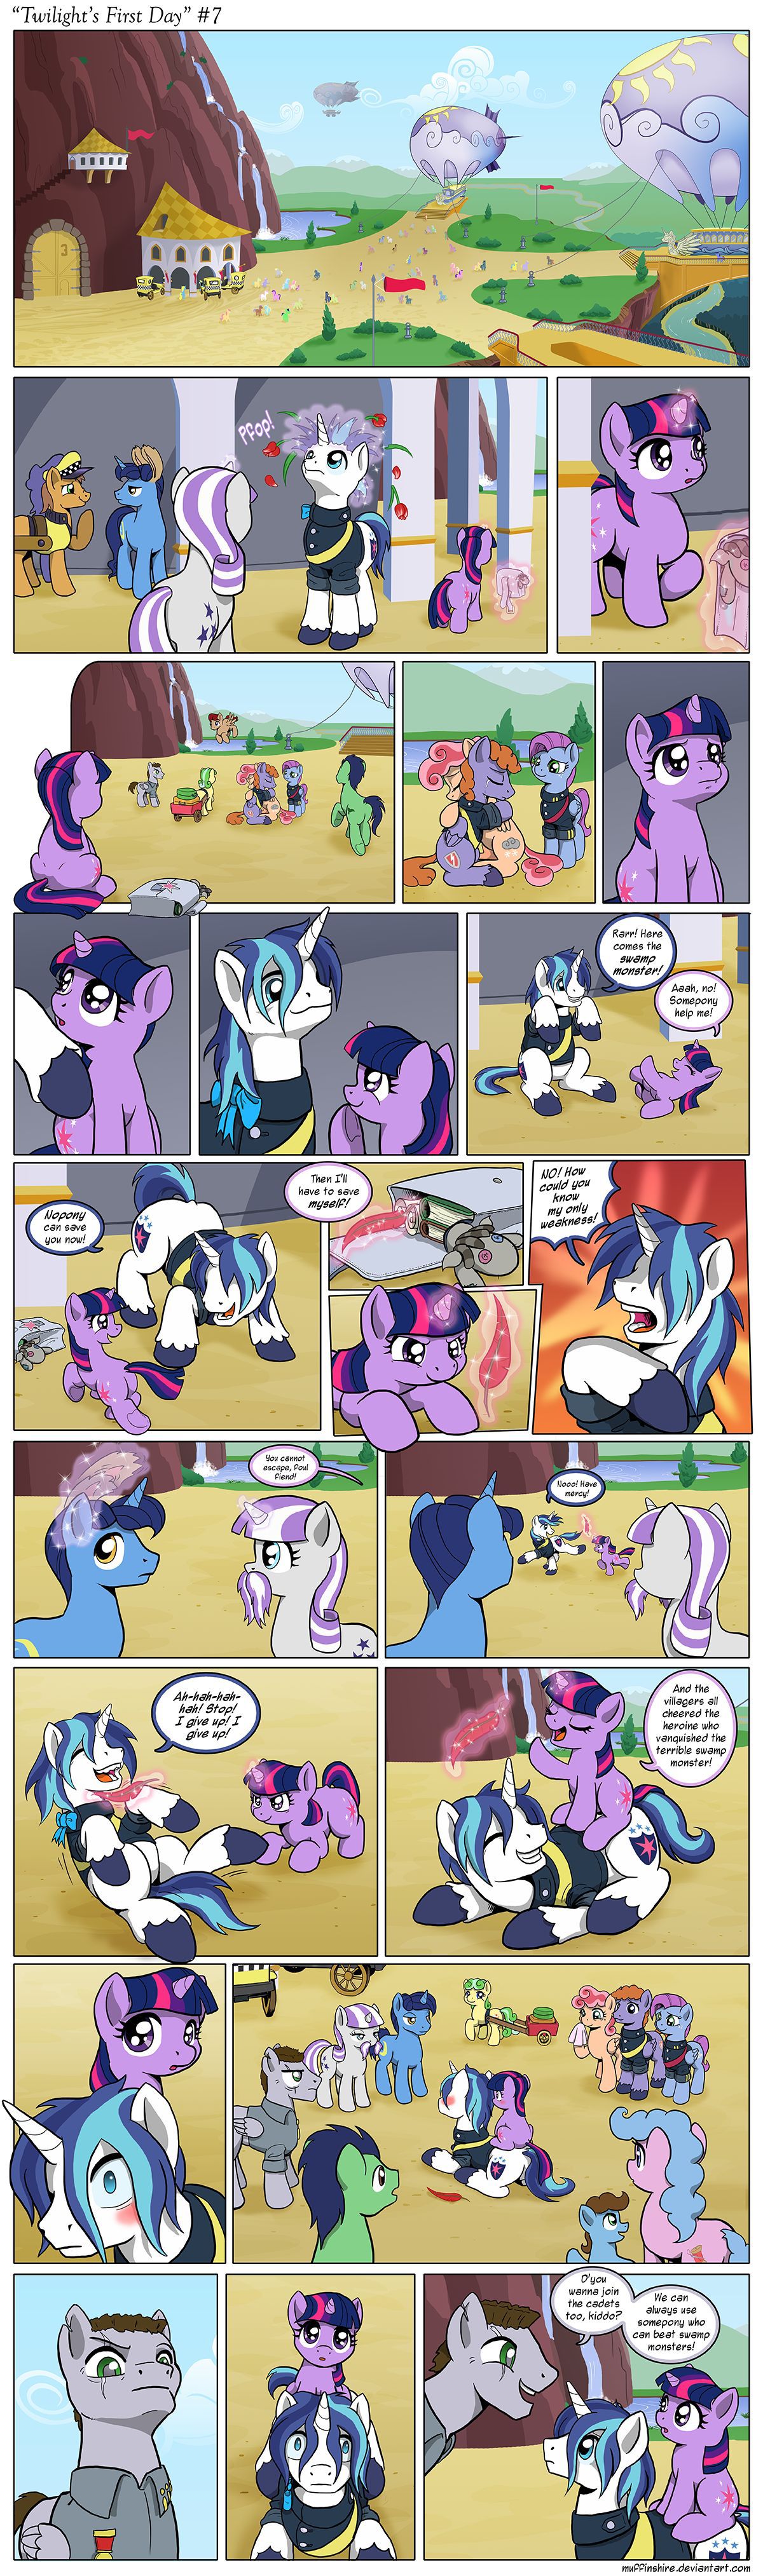 [Muffinshire] Twilight's First Day (My Little Pony: Friendship is Magic) [English] 7